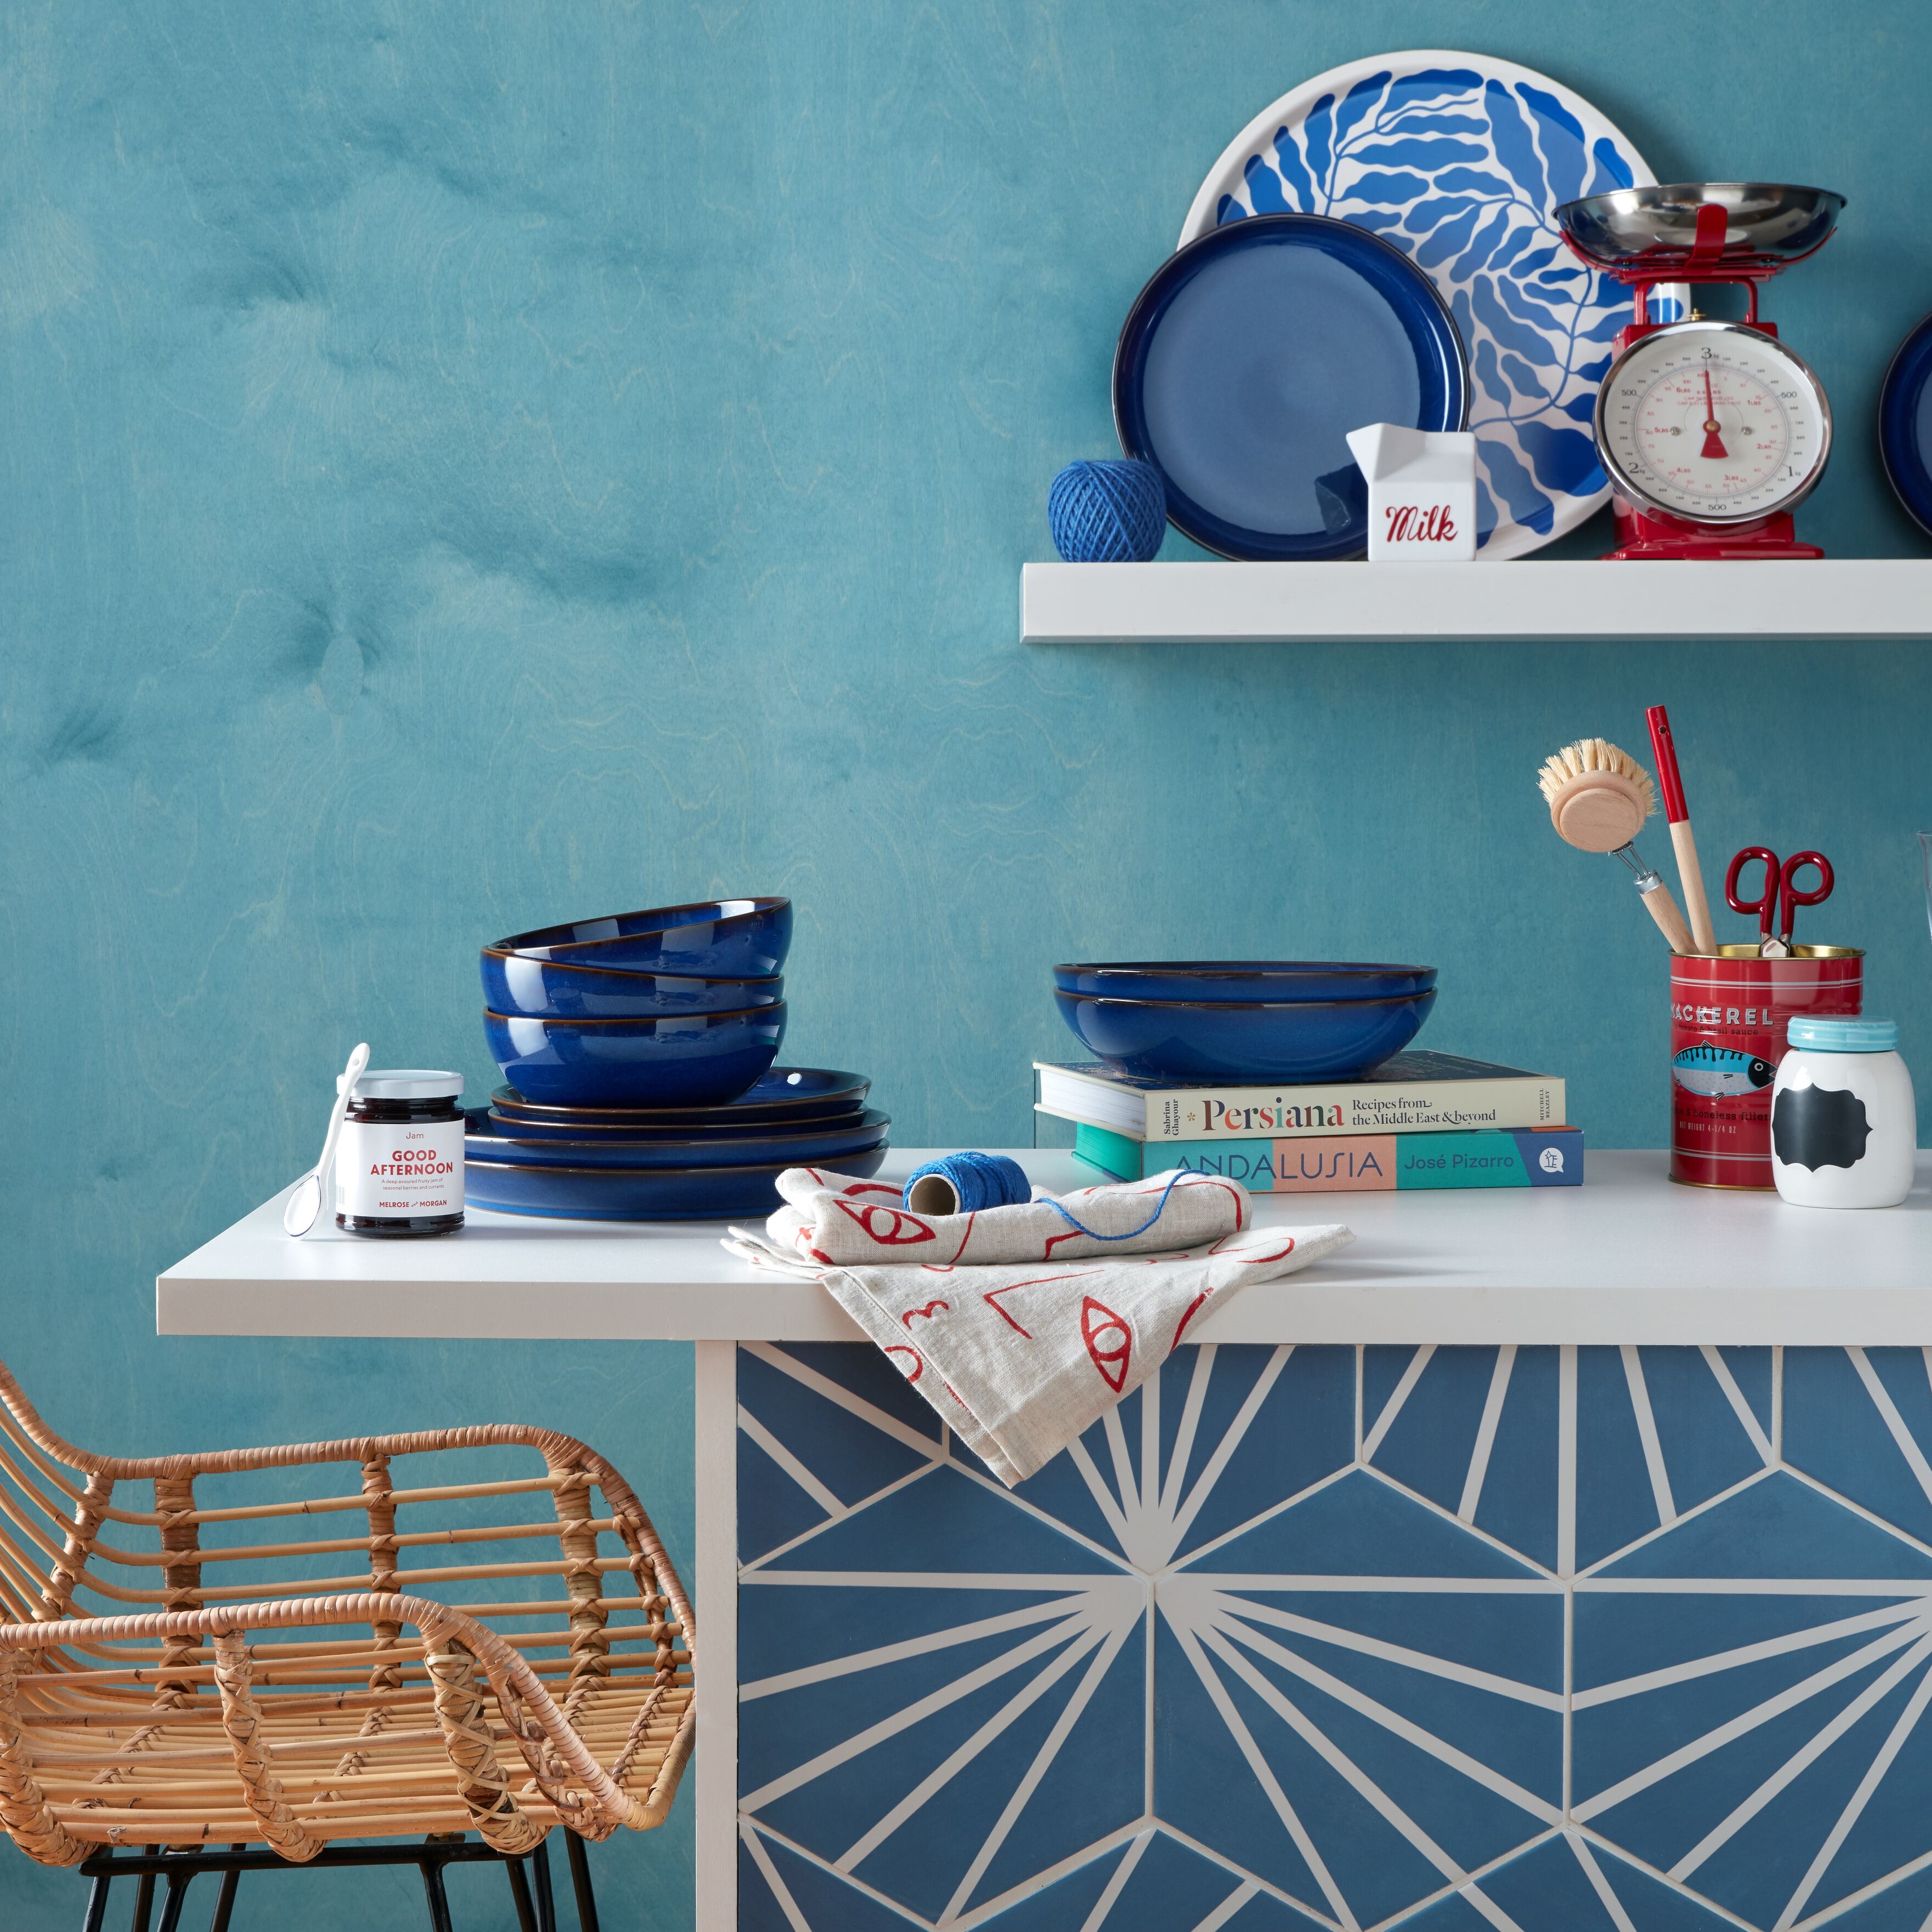 Discover amazing savings of up to 60% off RRP* on Denby Imperial Blue
Saving up to an extra 42% off outlet price  - Please see in-store for more details.
